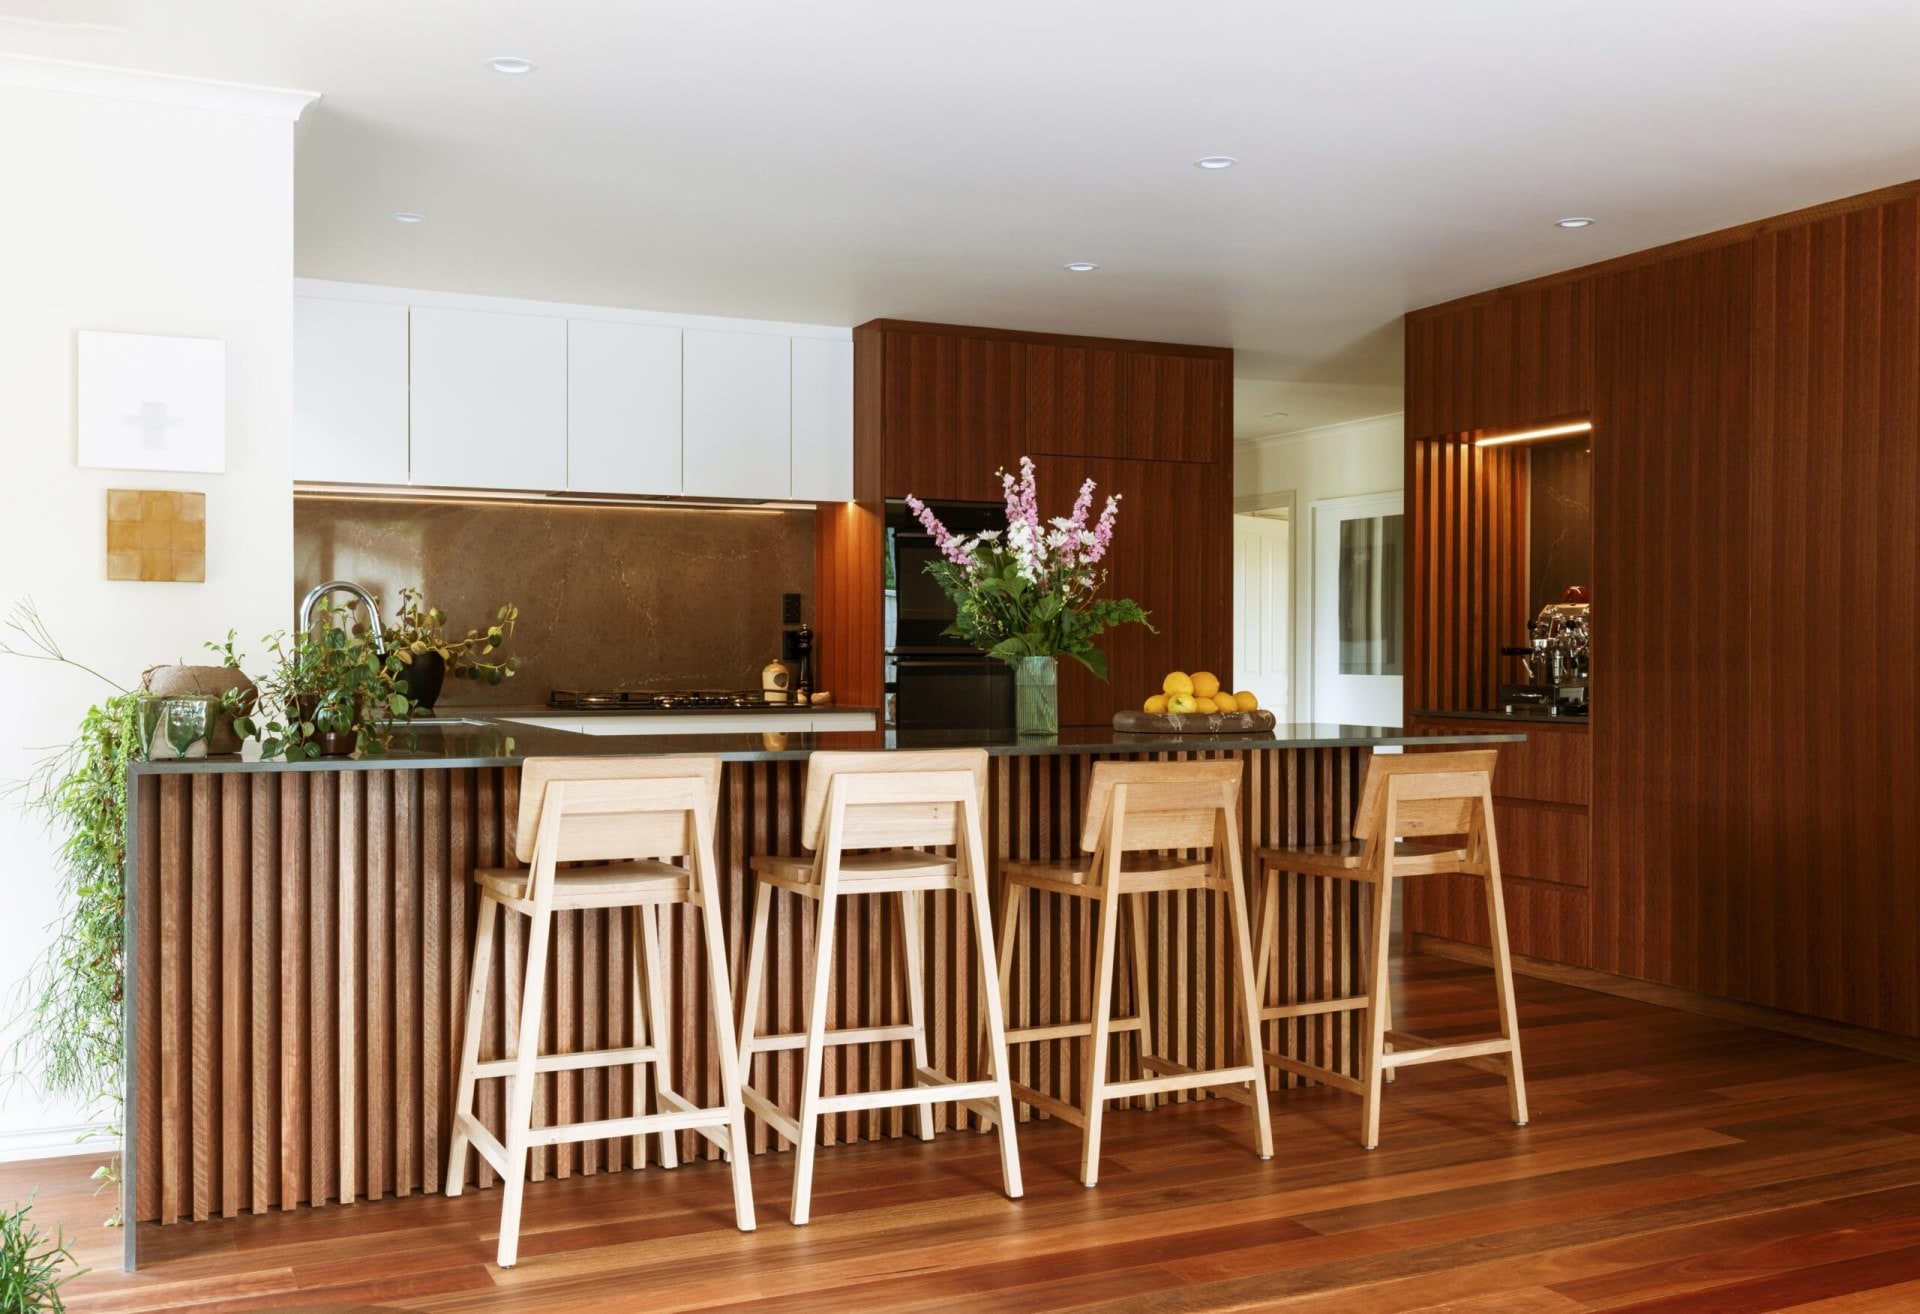 Lynda Wilson's remodelled kitchen made from Australian gum and wooden slats run along the side of the bench